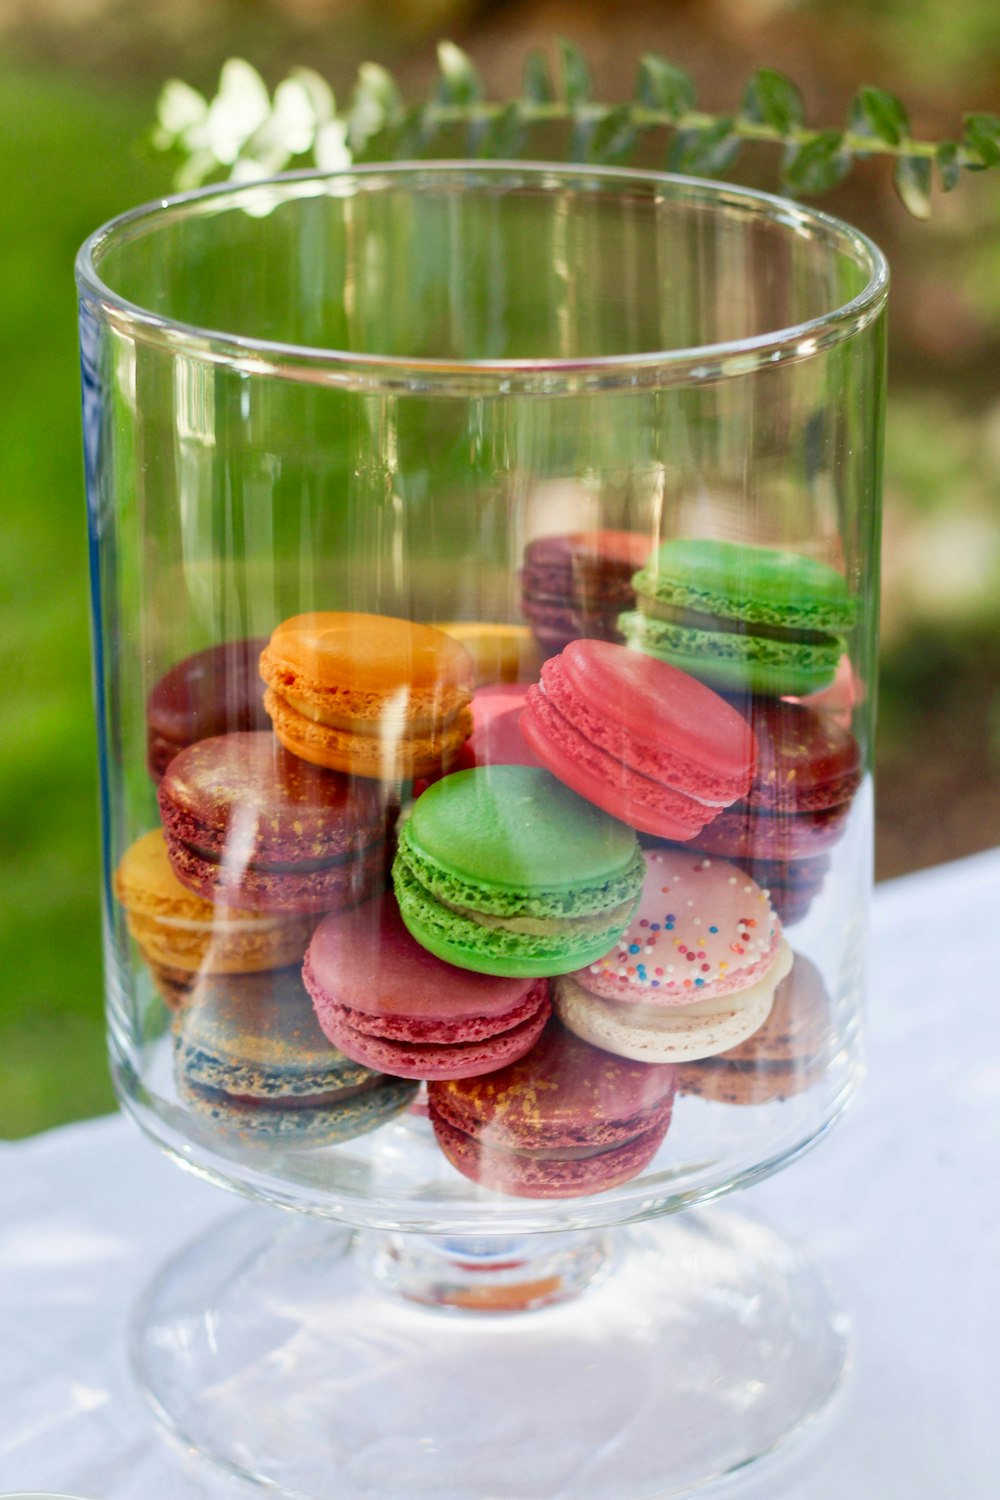 French macaroons inside clear glass container on top of table